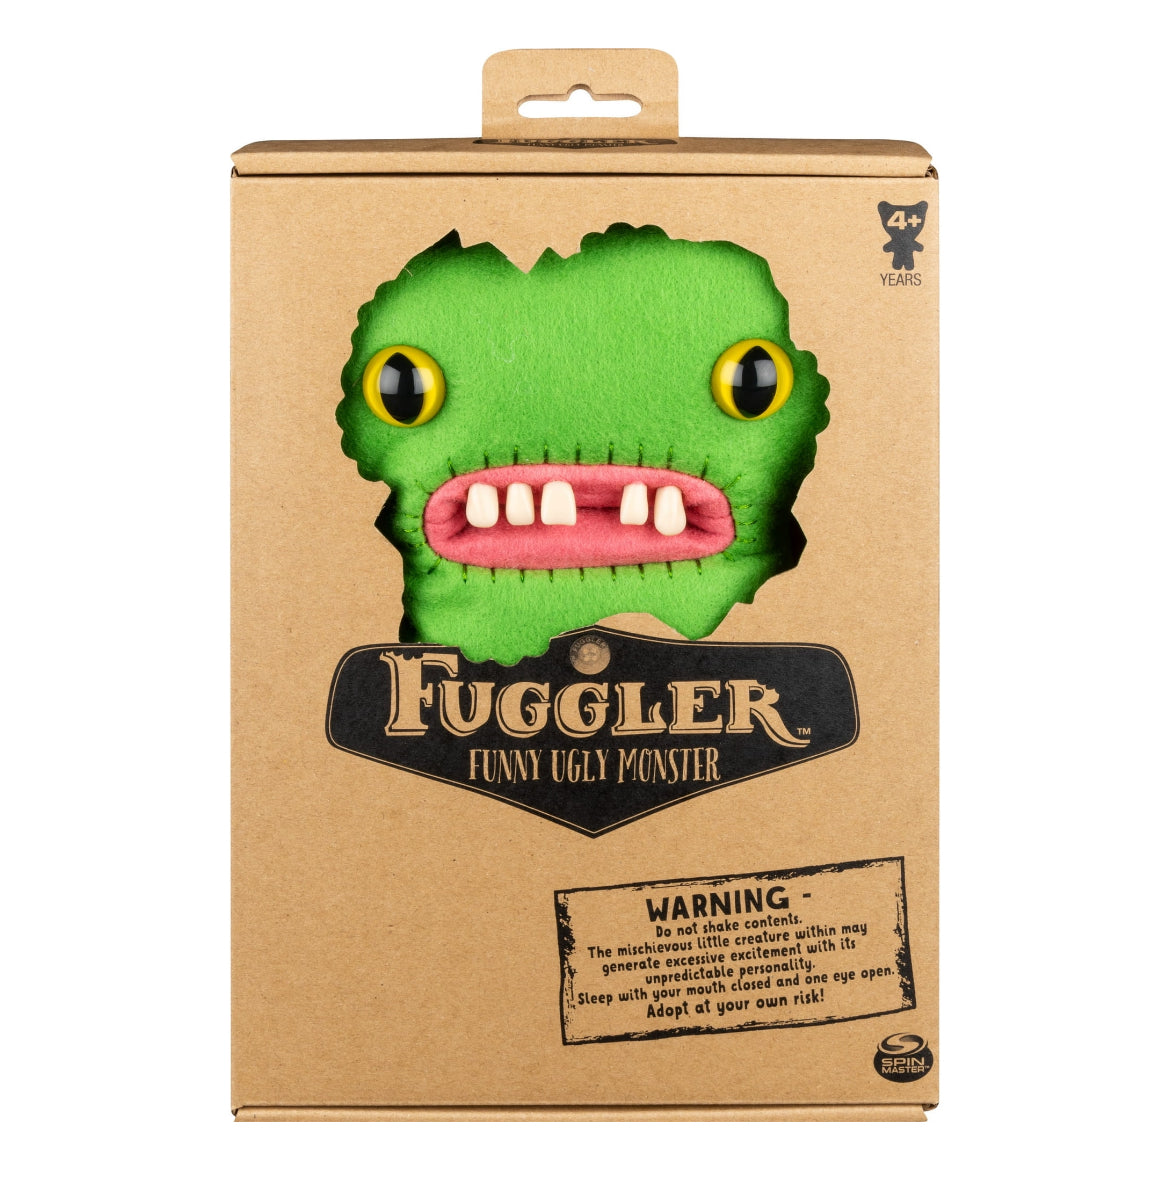 Fuggler, Funny Ugly Monster, 9 Inch Gap-Tooth McGoo (Green) Plush Creature with Teeth